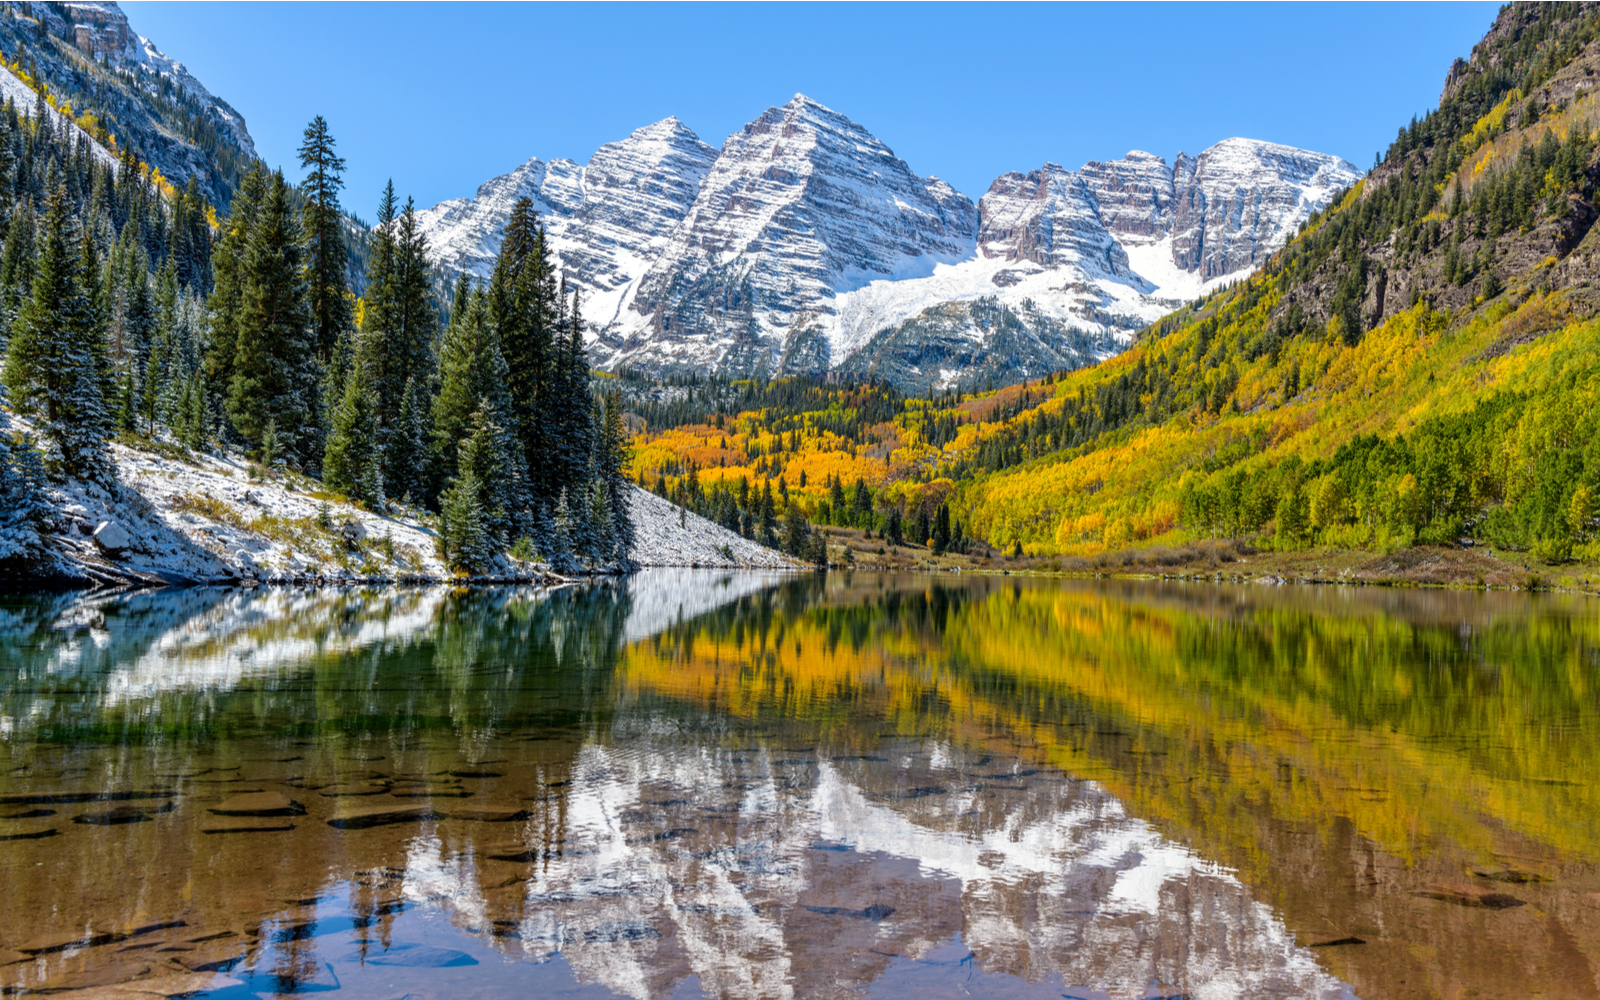 Marroon Lake pictured during the best time to visit Colorado, in the Spring or Fall